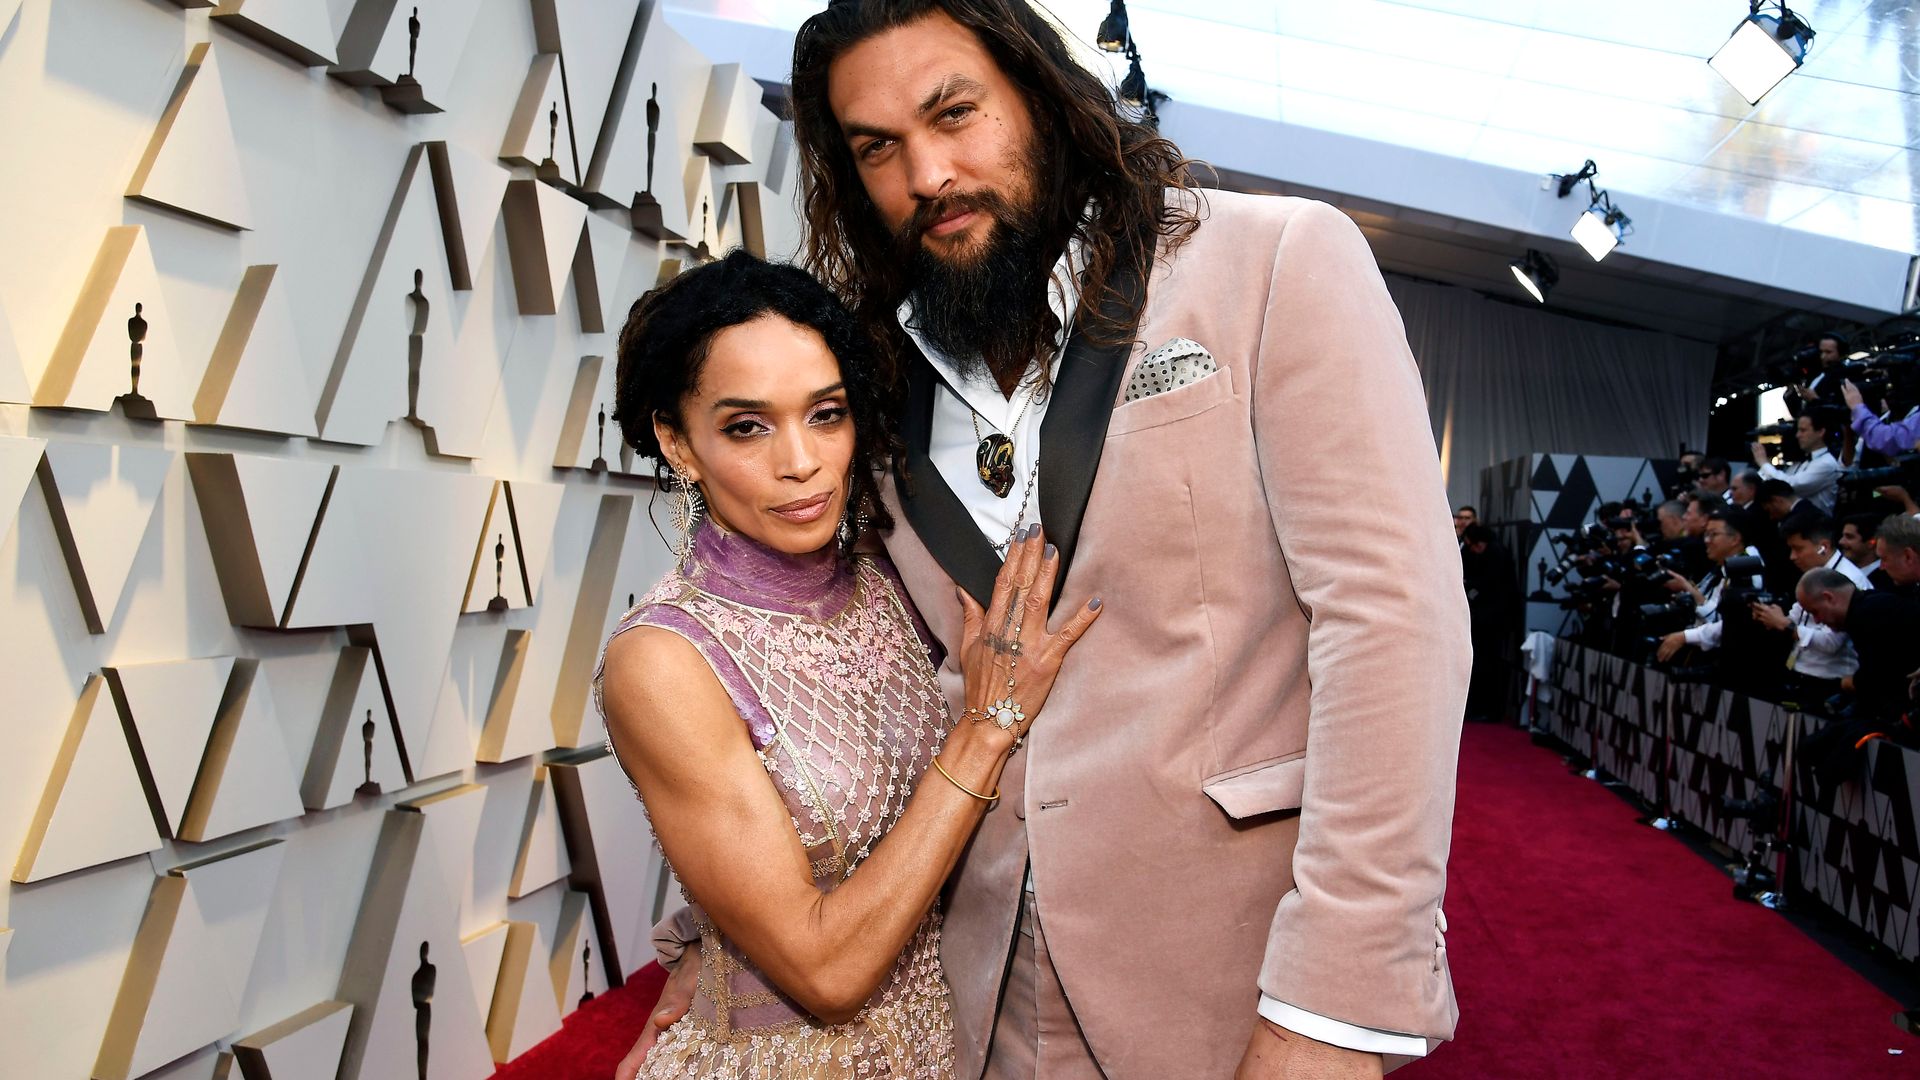 Lisa Bonet and Jason Momoa attend the 91st Annual Academy Awards at Hollywood and Highland on February 24, 2019 in Hollywood, California.